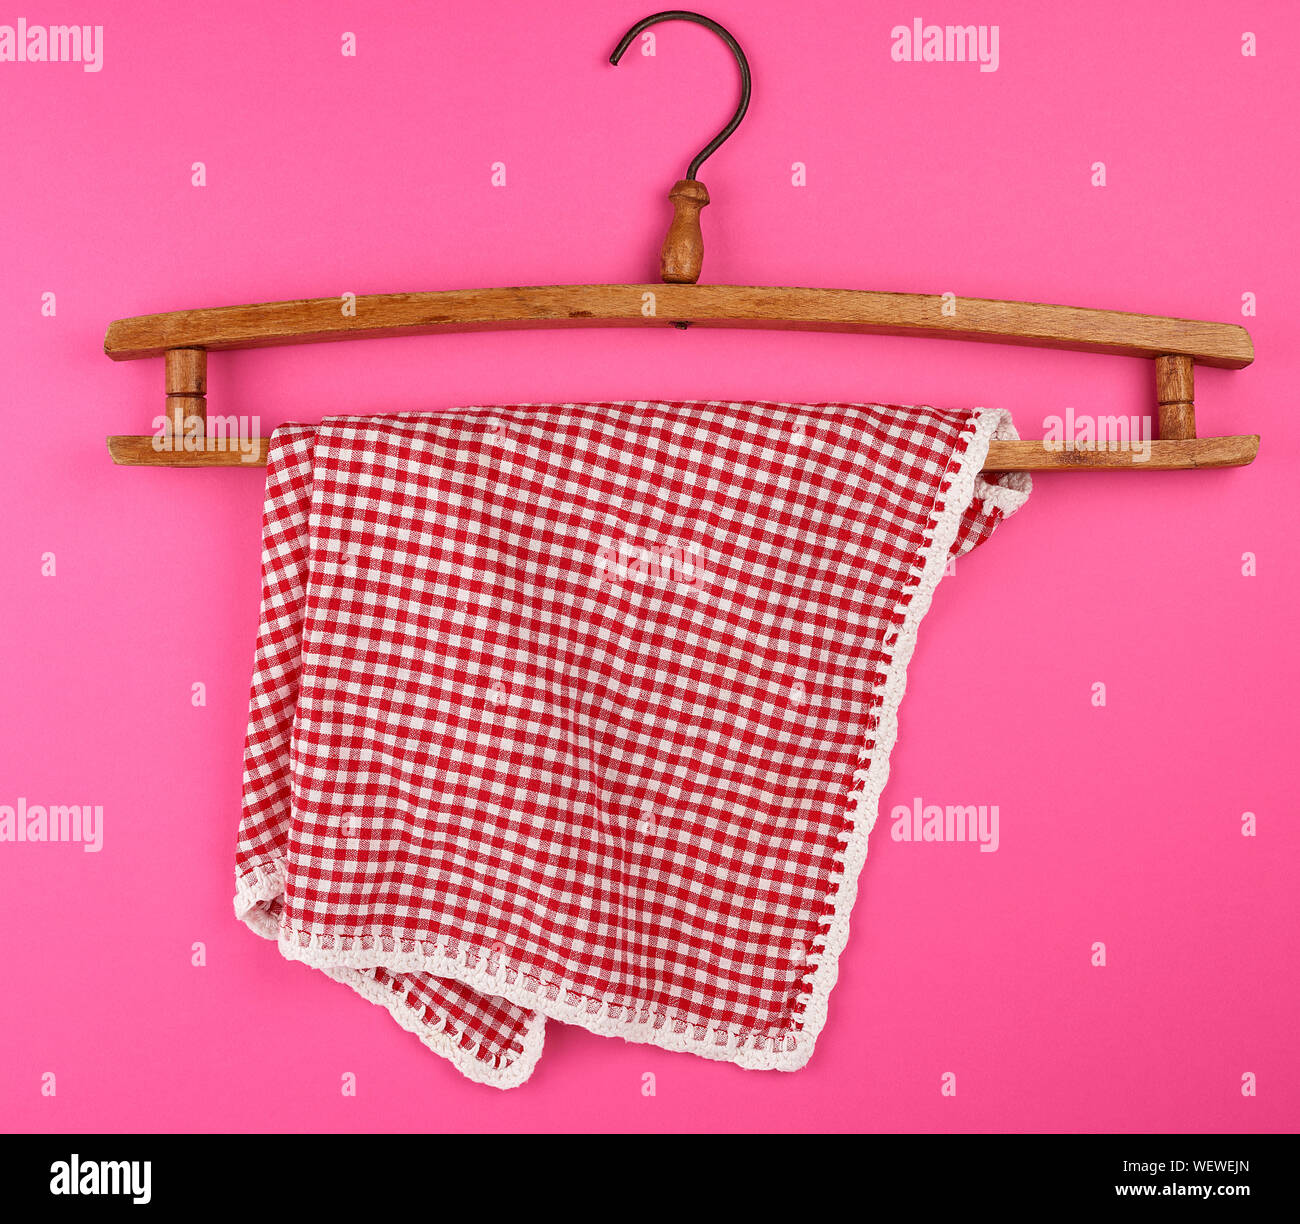 red checkered kitchen towel hanging on a vintage wooden hanger, pink background Stock Photo